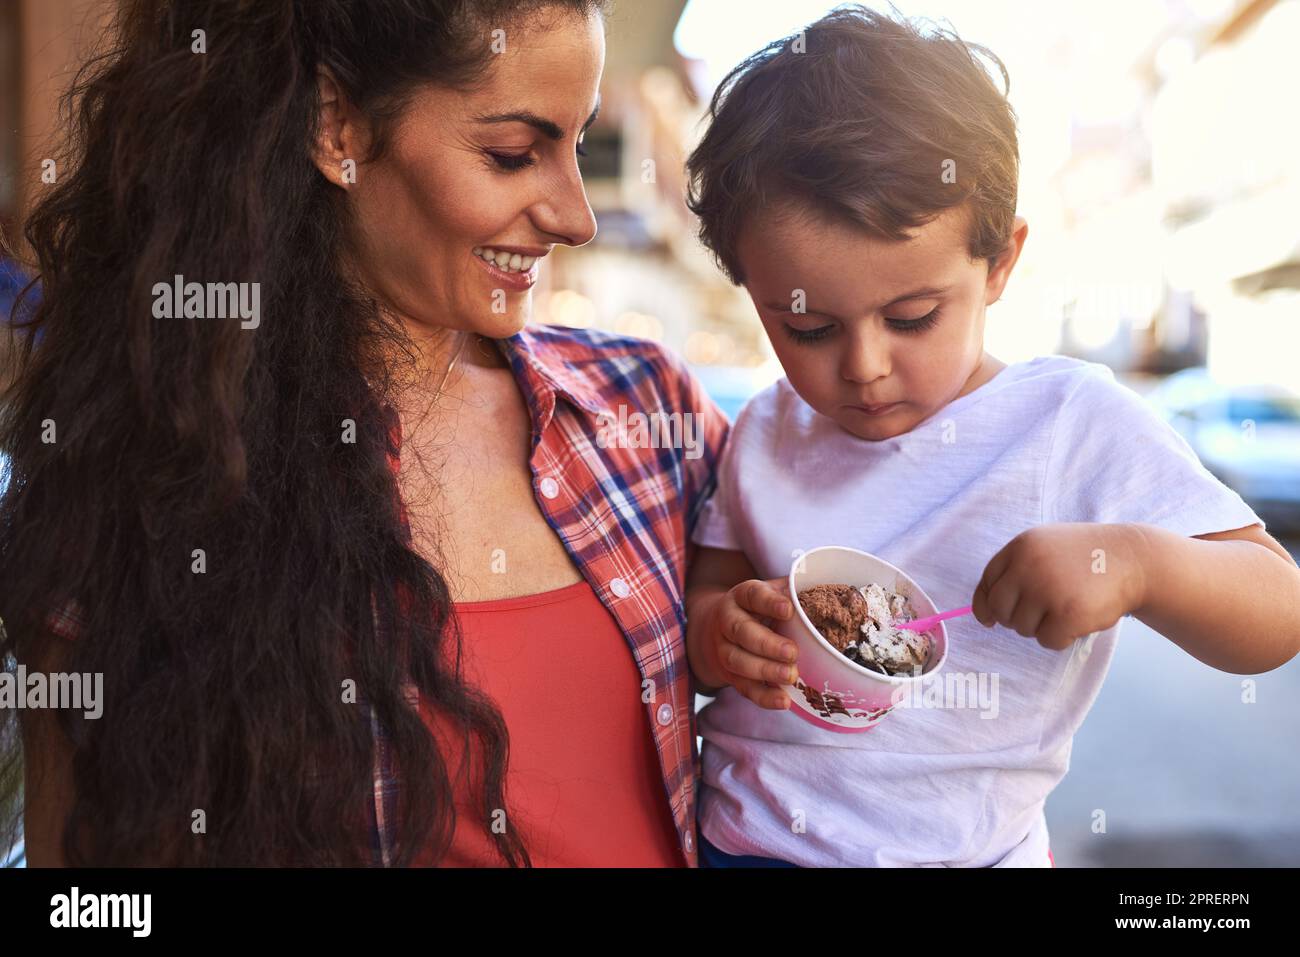 Tell me how it tastes. an attractive young woman and her young son at an ice cream shop. Stock Photo